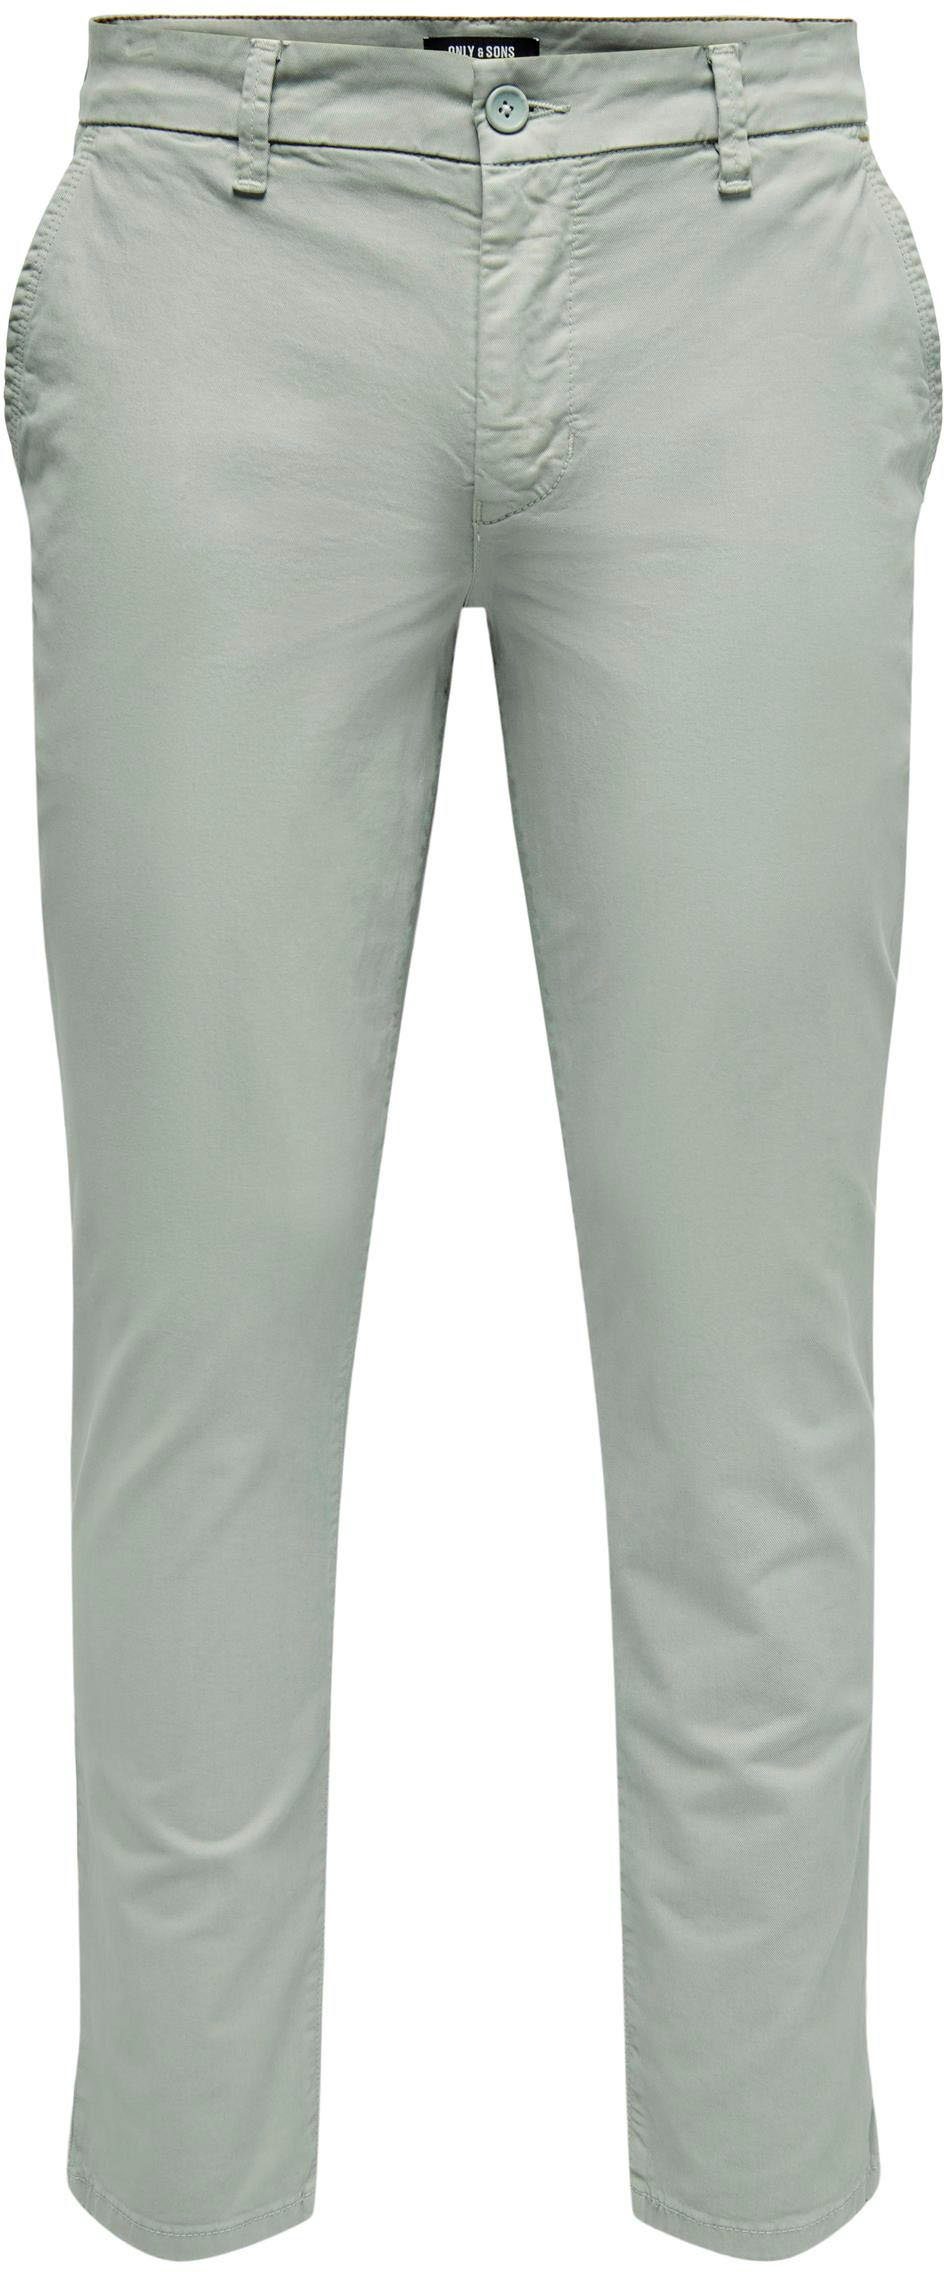 ONLY & SONS limestone im Chinohose 4-Pocket-Style